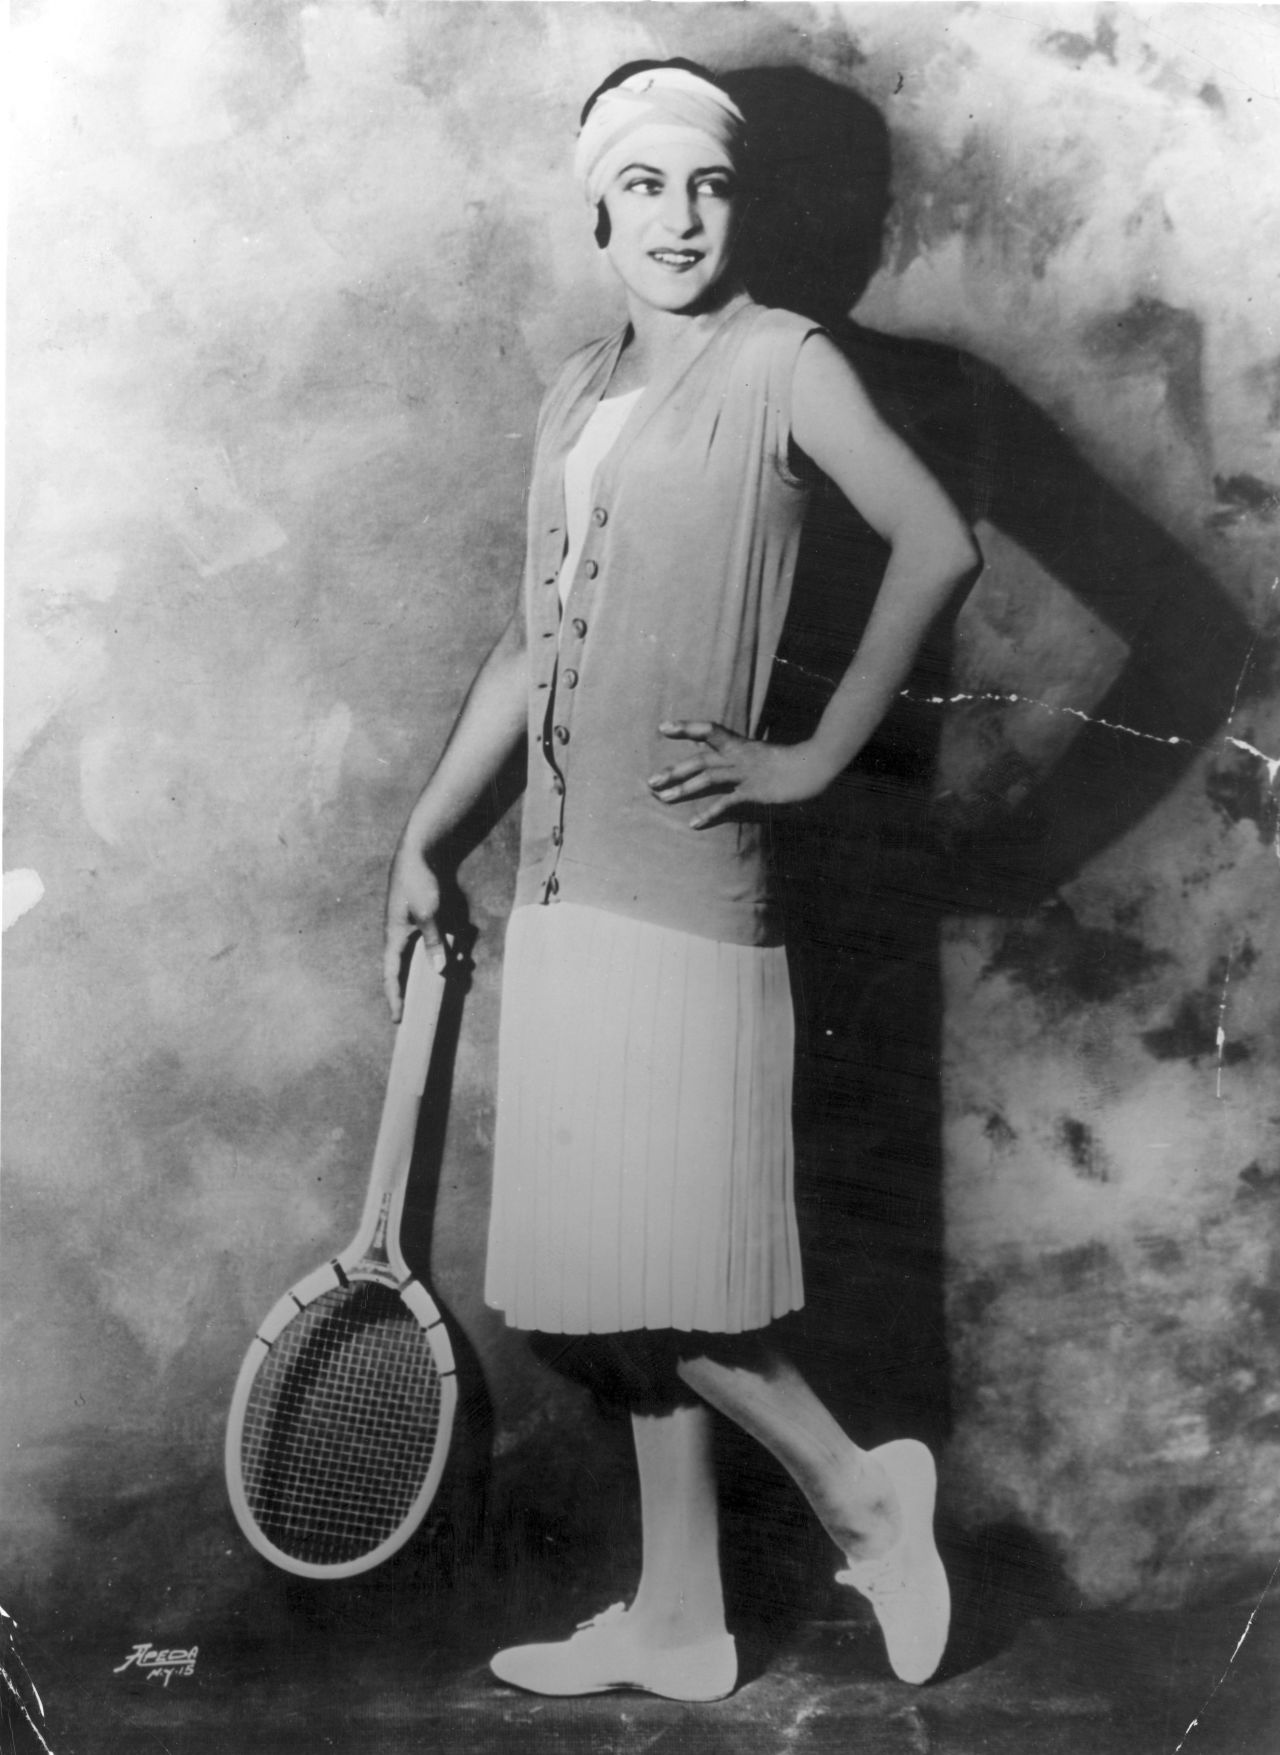 One of the most controversial players of the 1920s was chic French star Suzanne Lenglen (pictured in 1925).<br />"She was scandalous in many different ways; sometimes sipping brandy in the changeovers," says Rothenberg.<br />"Suzanne really was a tennis icon who had a lot of influence on general fashion. Even the head wraps she'd wear to keep the hair out of her eyes became a fixture of 1920s fashion for women around Europe and the U.S."